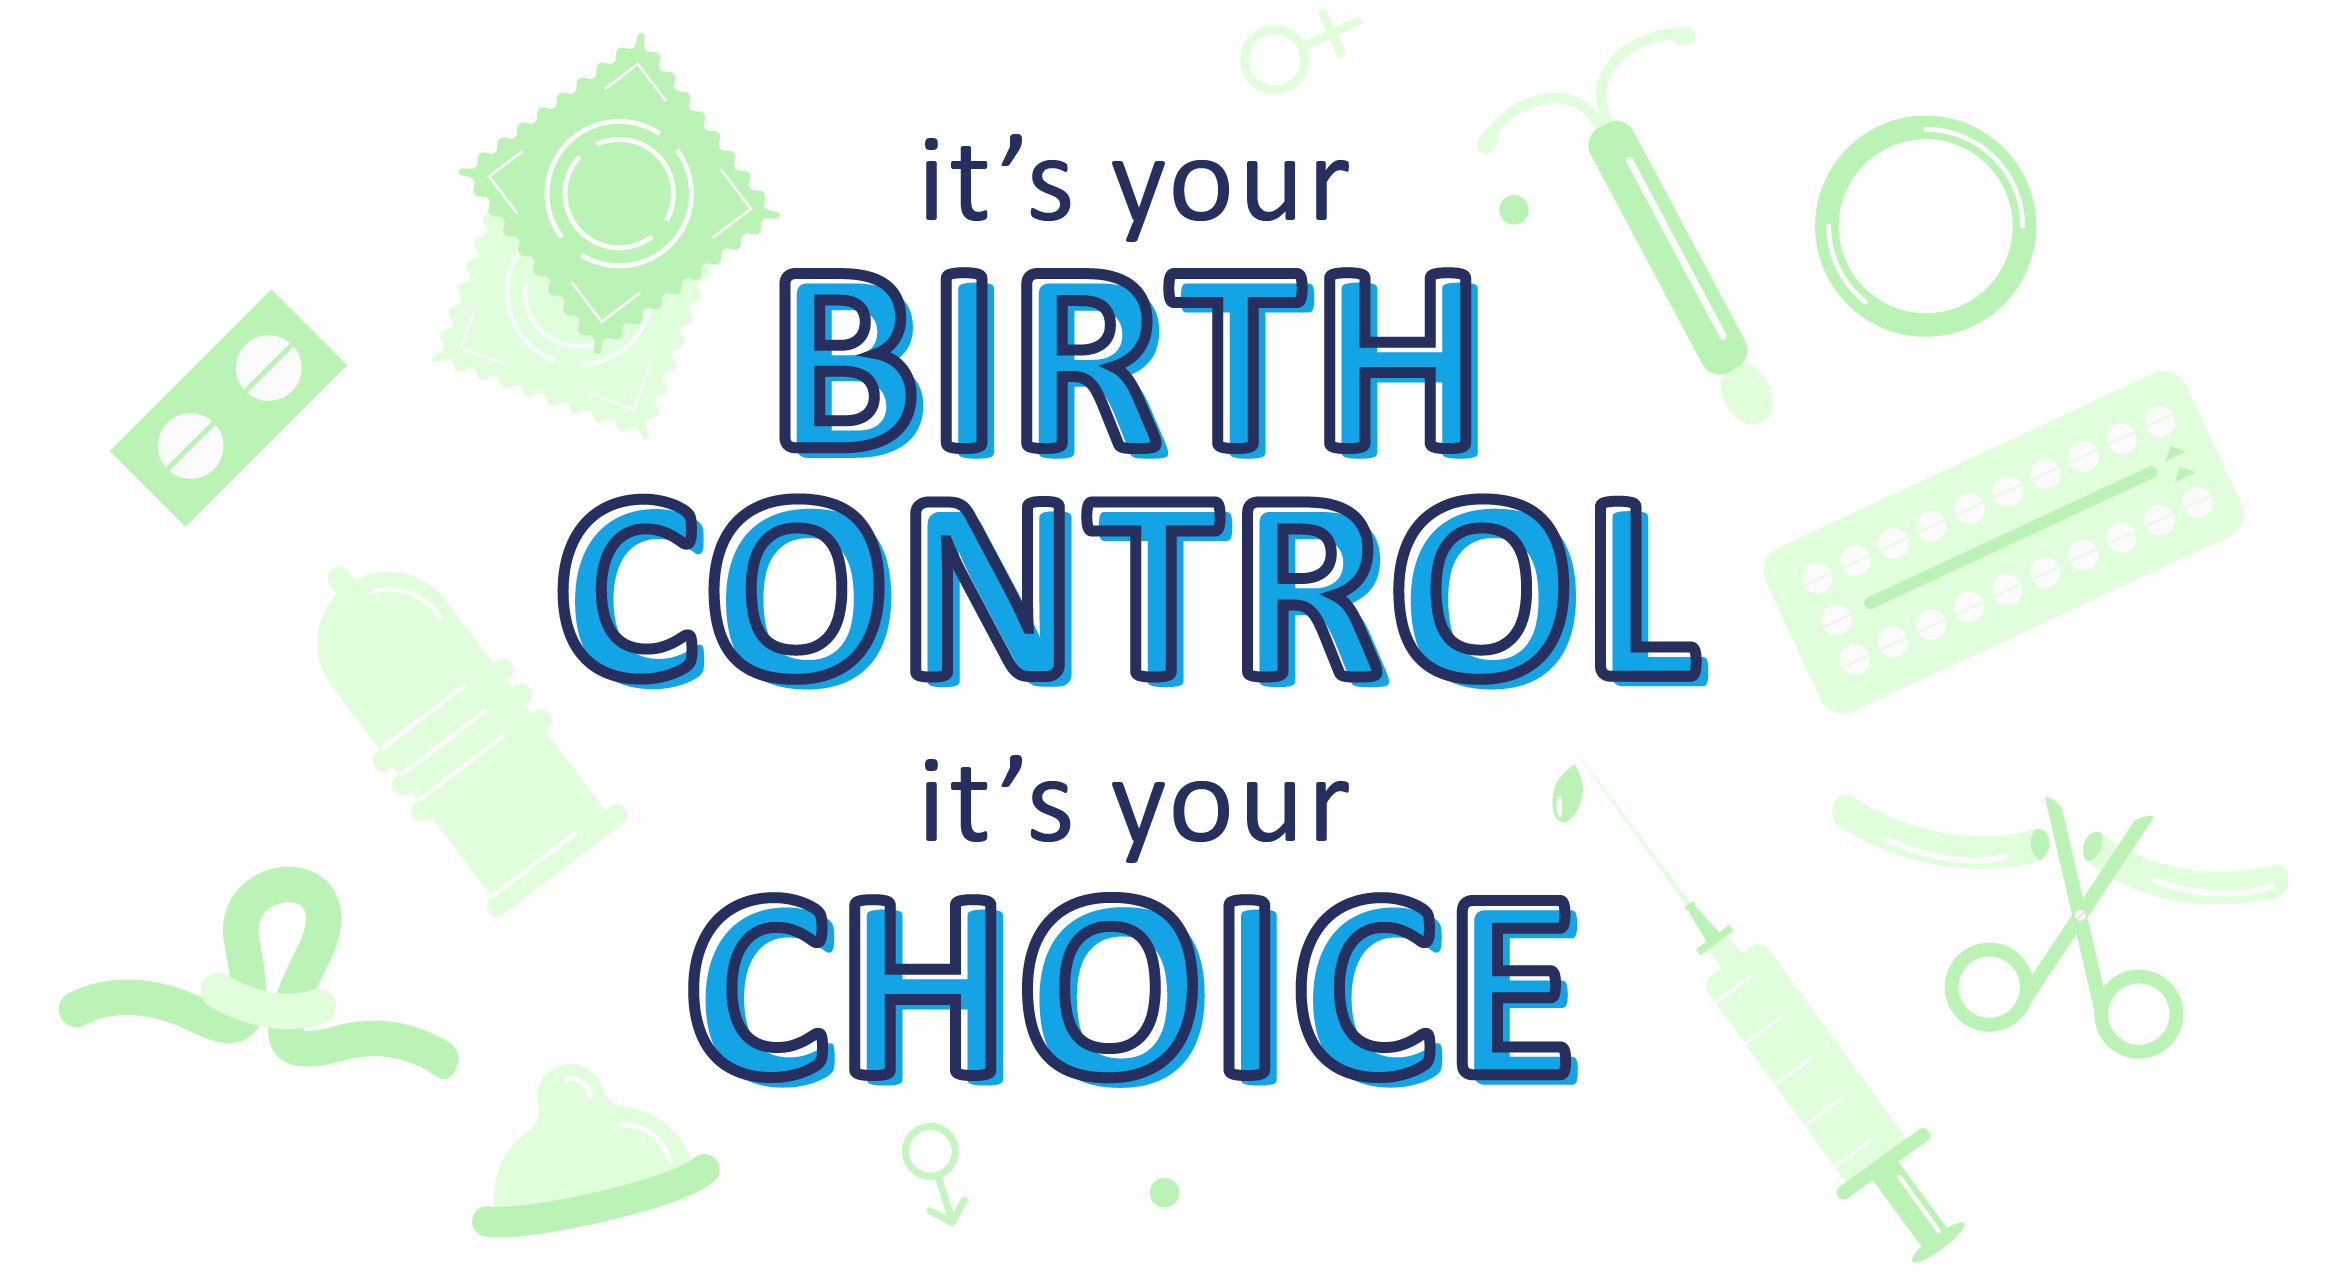 It's your birth control. It's your choice.